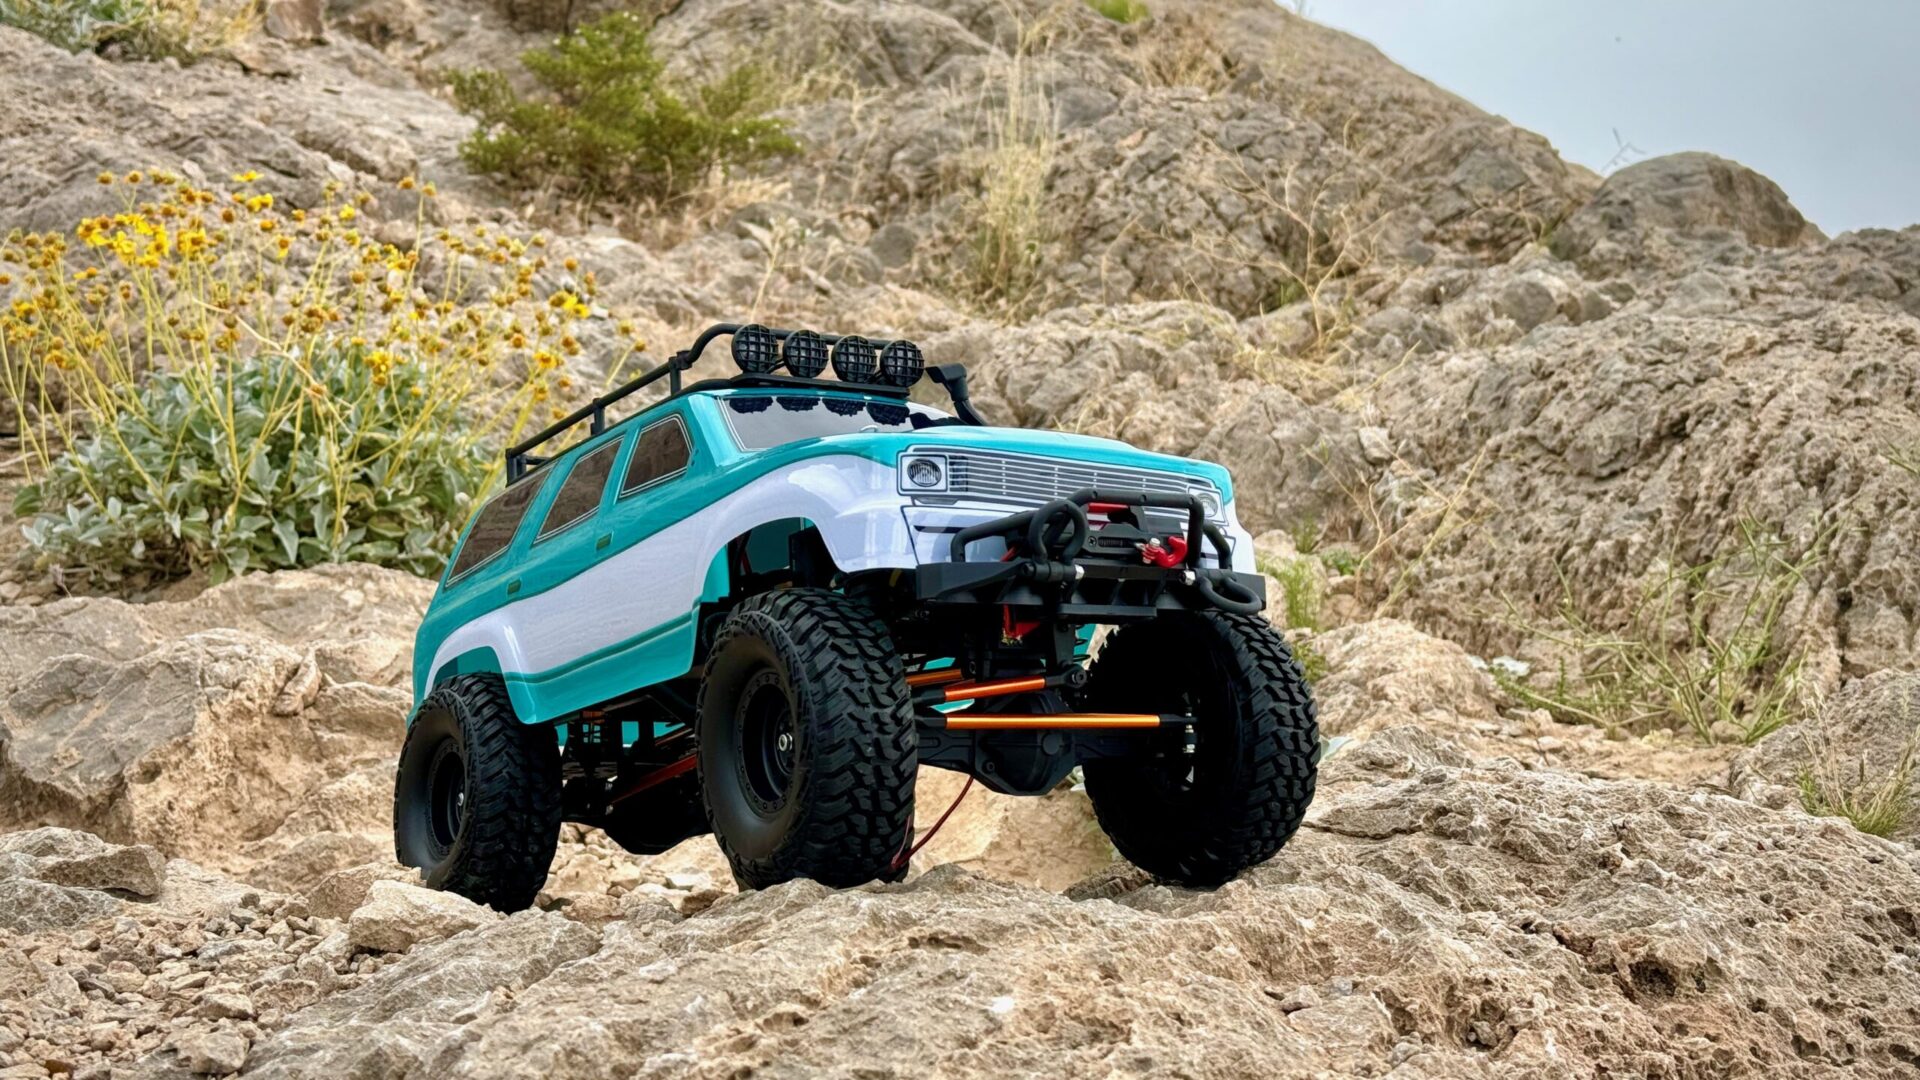 Laegendary Grando 1:10 Scale RC Rock Crawler Hands-On Review: Hobby-Quality At An Online Price